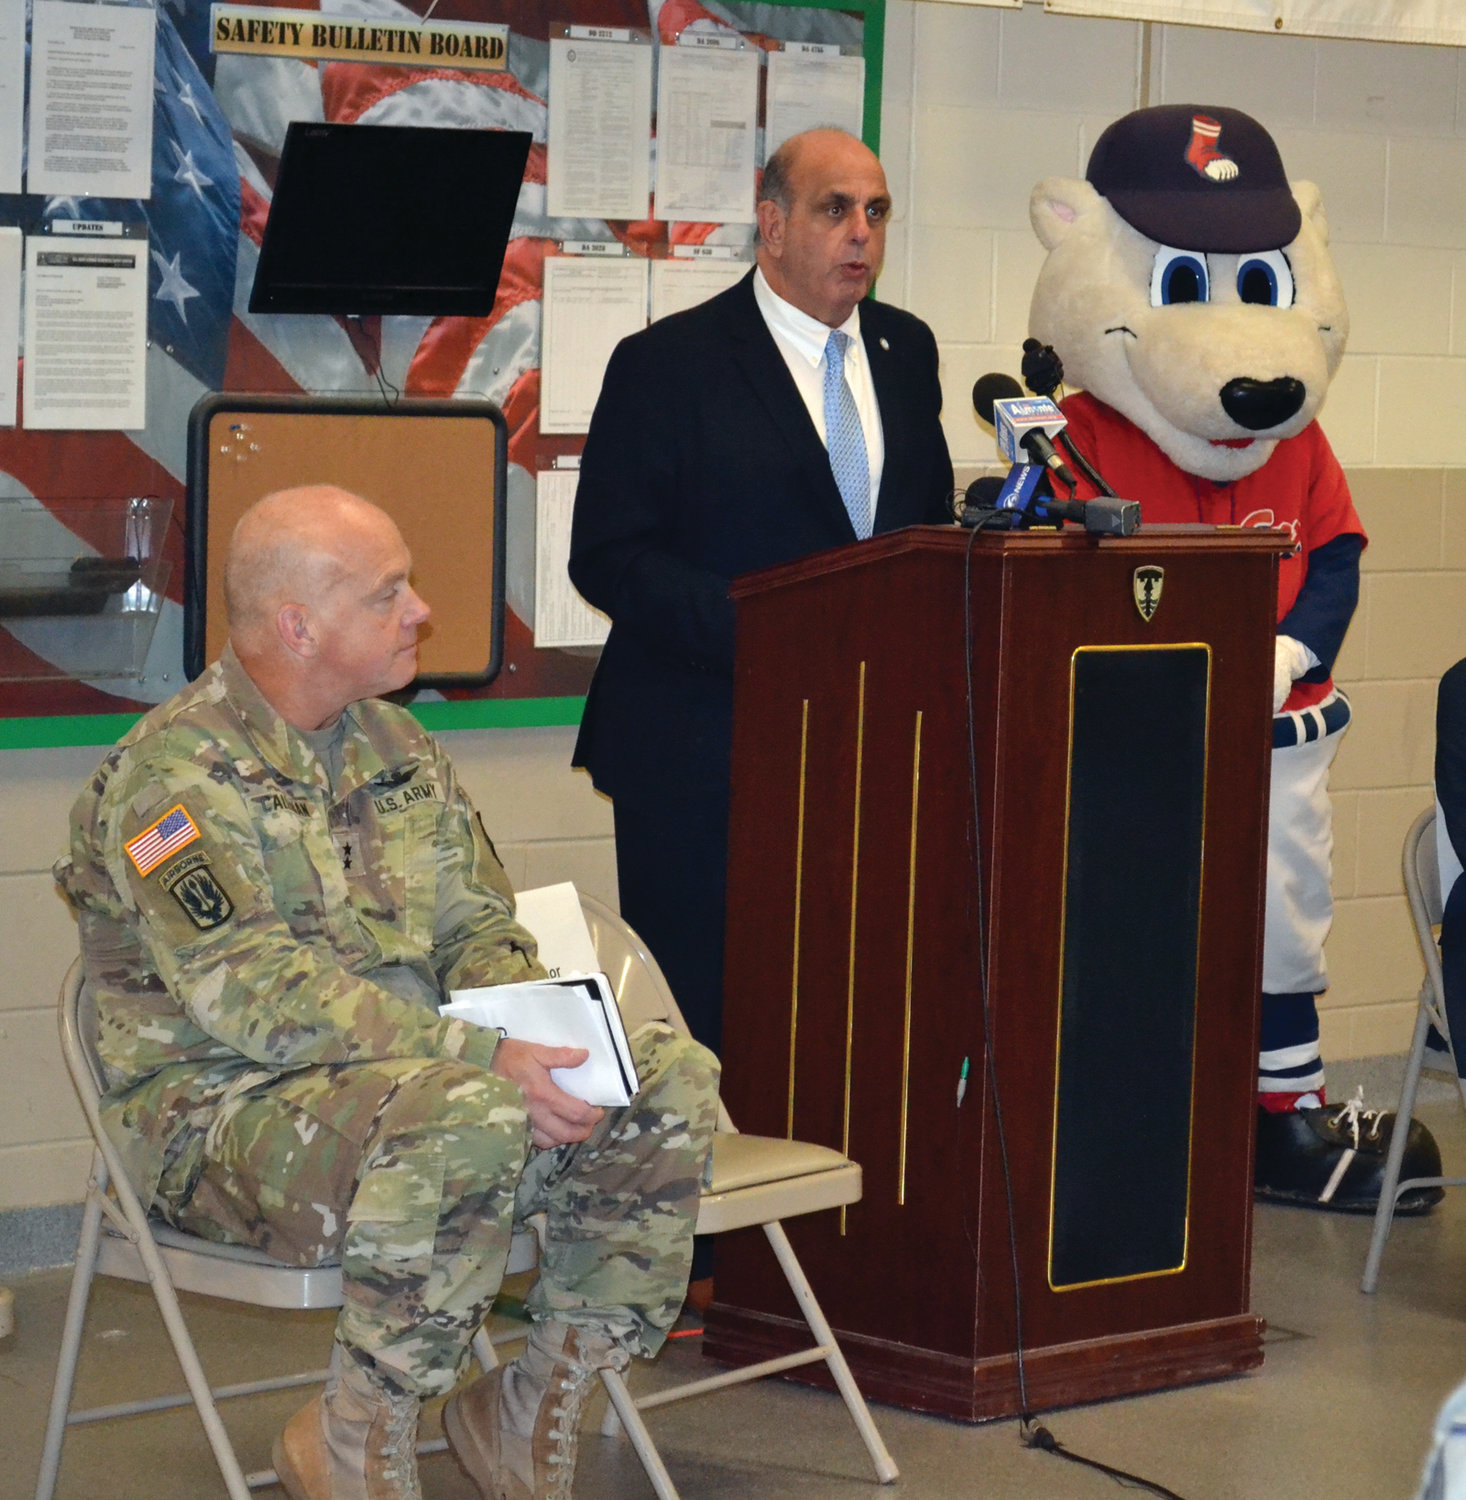 PROUD HOST: Warwick Mayor Joseph Solomon, pictured here between Maj. Gen. Christopher Callahan and Pawtucket Red Sox mascot Paws, spoke proudly of the city’s role in Operation Holiday Cheer.